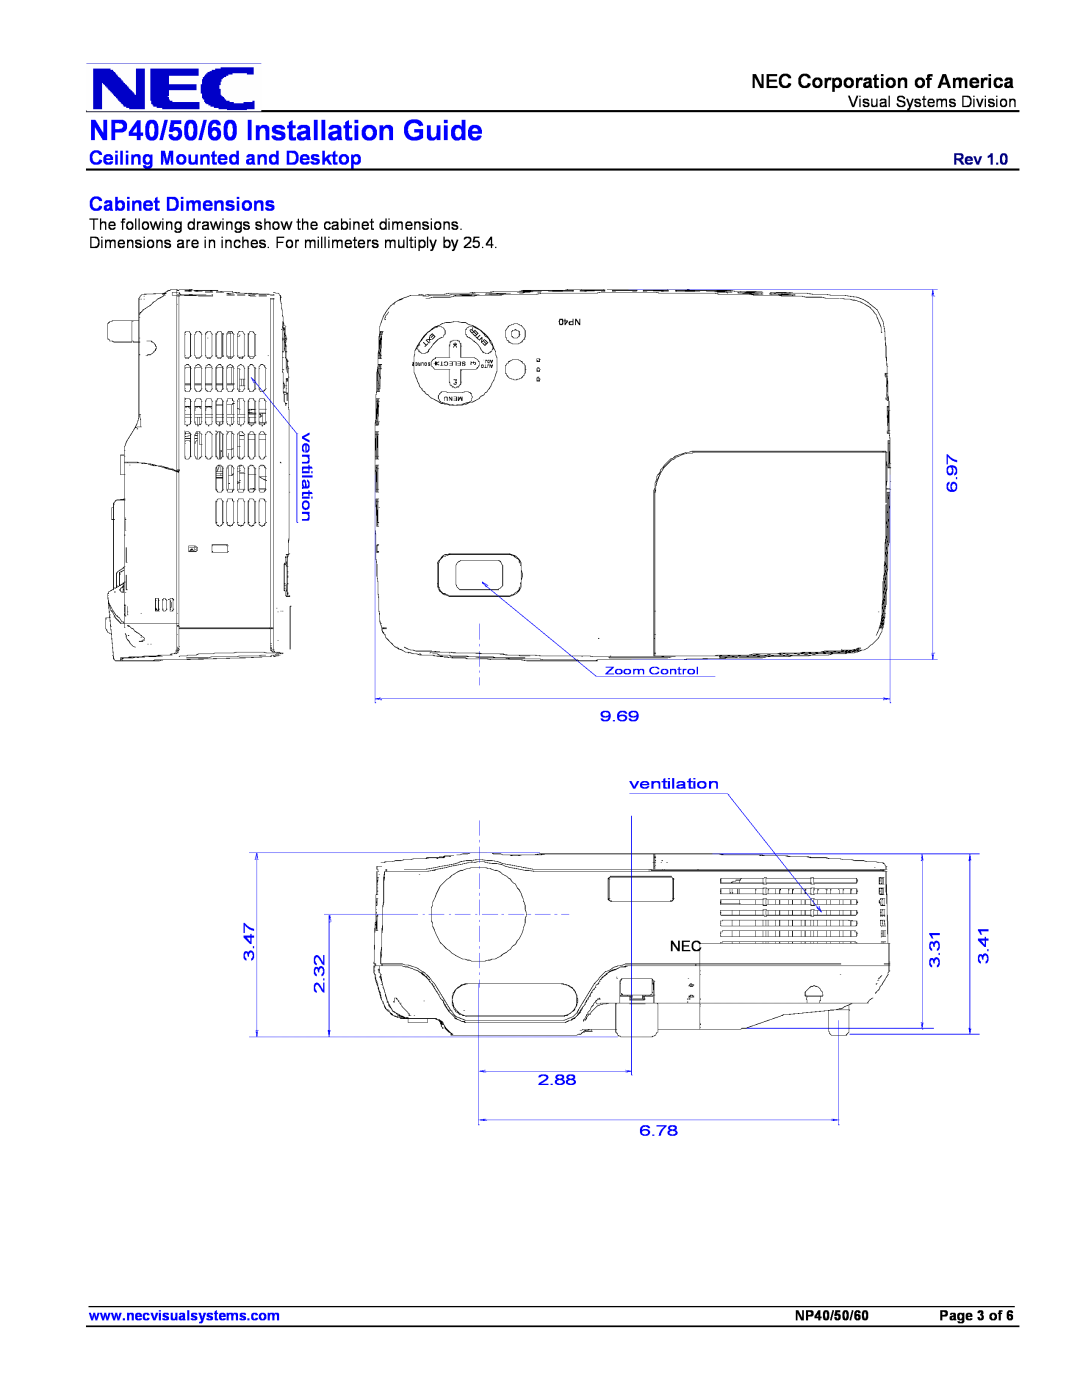 NEC NP60 Ceiling Mounted and Desktop Cabinet Dimensions, NP40/50/60 Installation Guide, ventilation, 3.47, 2.32, 6.97 